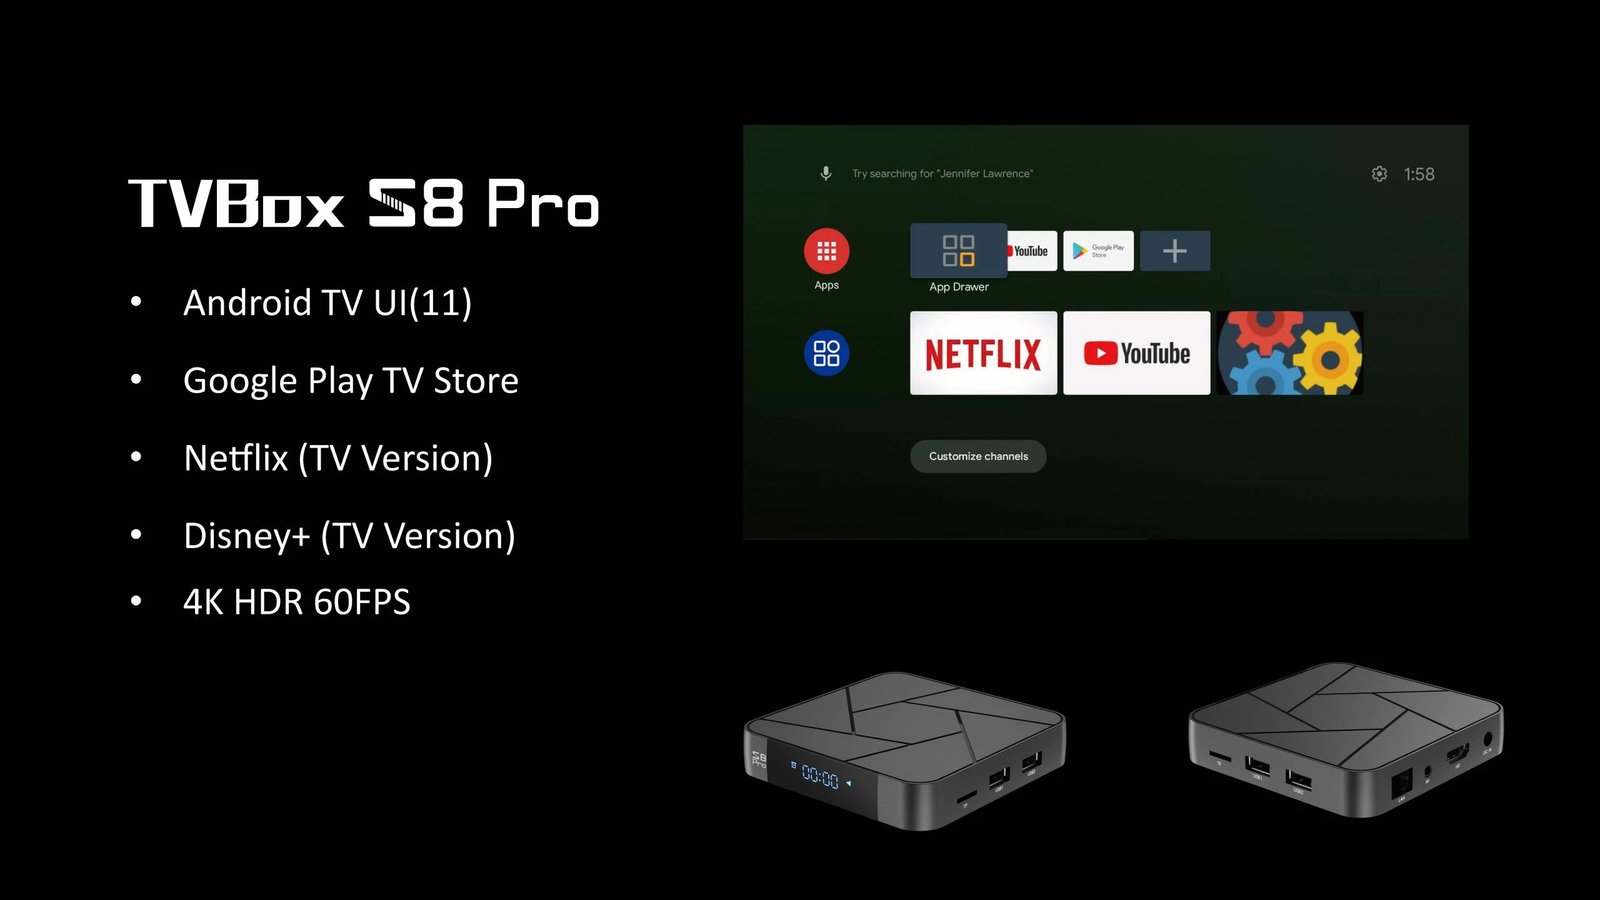 Android Box S8 Pro 4K Ultra HD